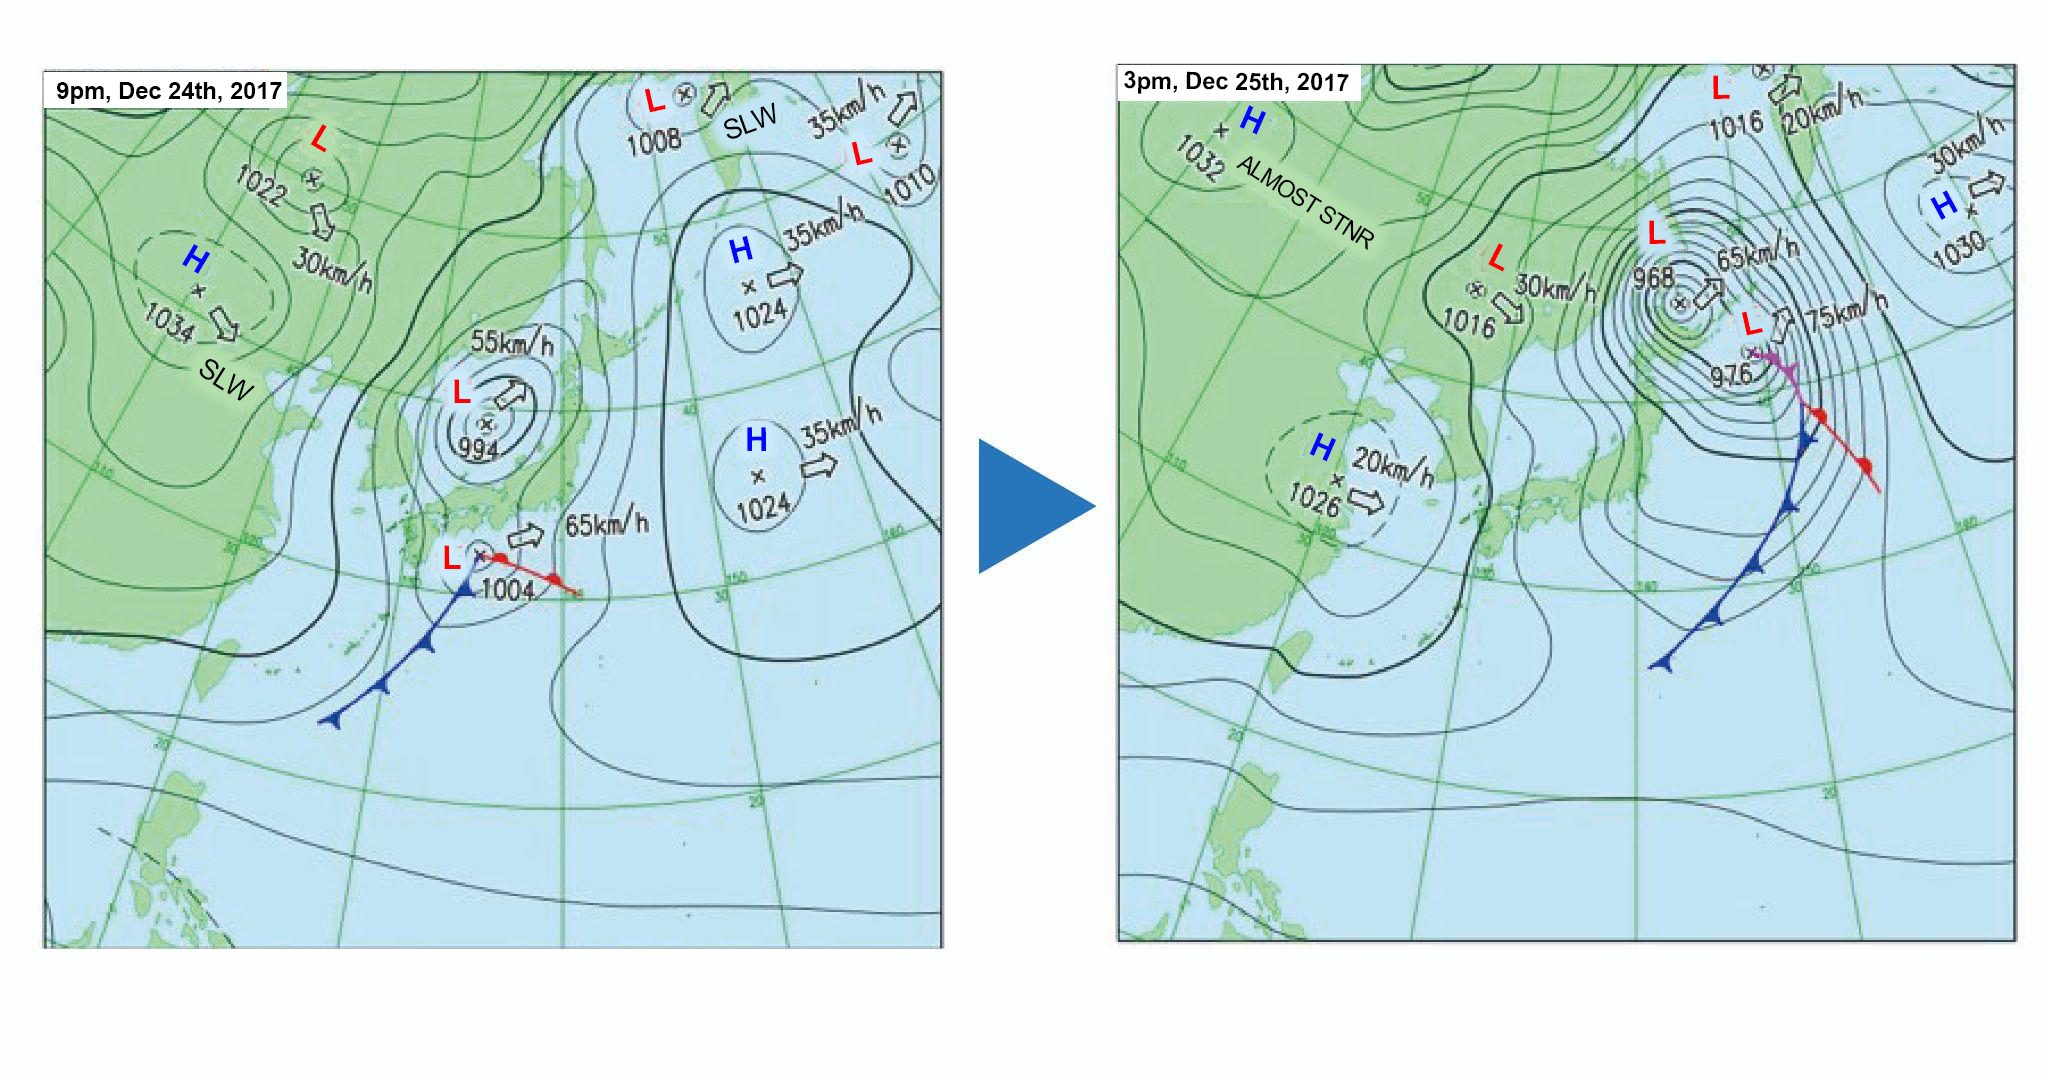 Weather map for 24 December (left) and 25 December 2017 (right). Two depression systems in the Sea of Japan and the Pacific Ocean approached each other while developing, resulting in a 'double bomb cyclone' near Hokkaido. (Adapted from the weather maps provided by Japan Meteorological Agency)